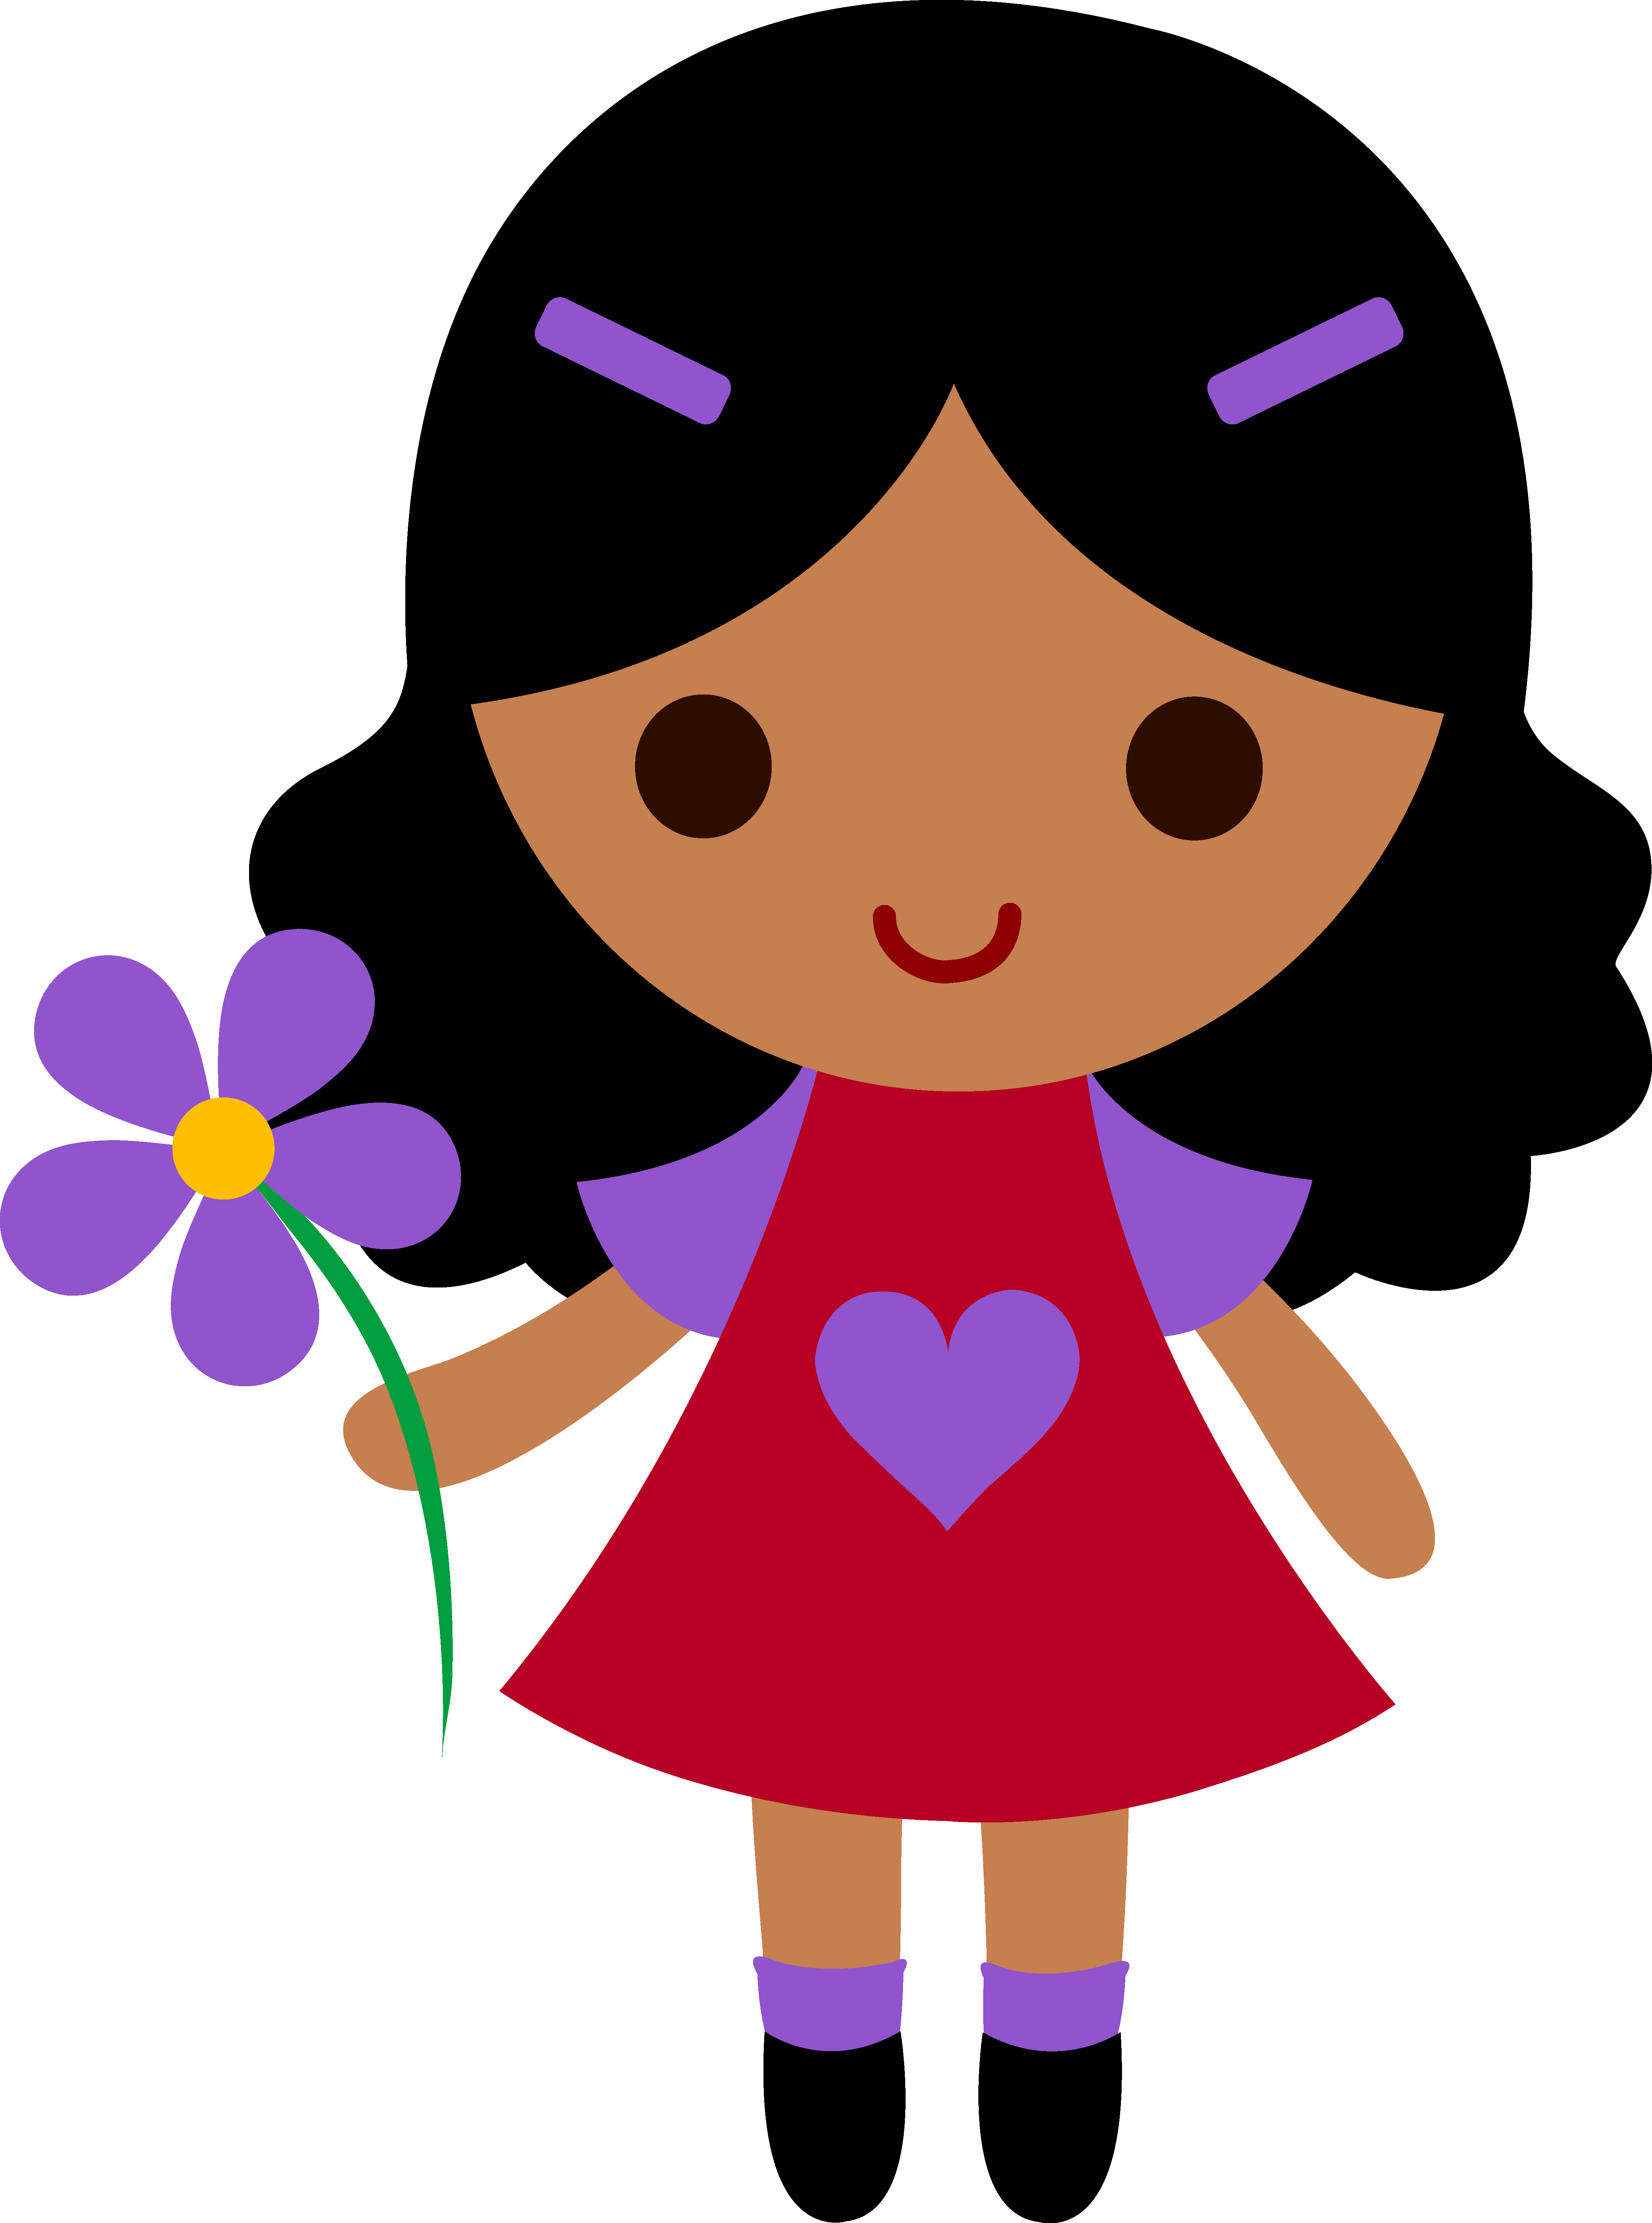 A Cartoon Picture Of A Girl | Free Download Clip Art | Free Clip ...